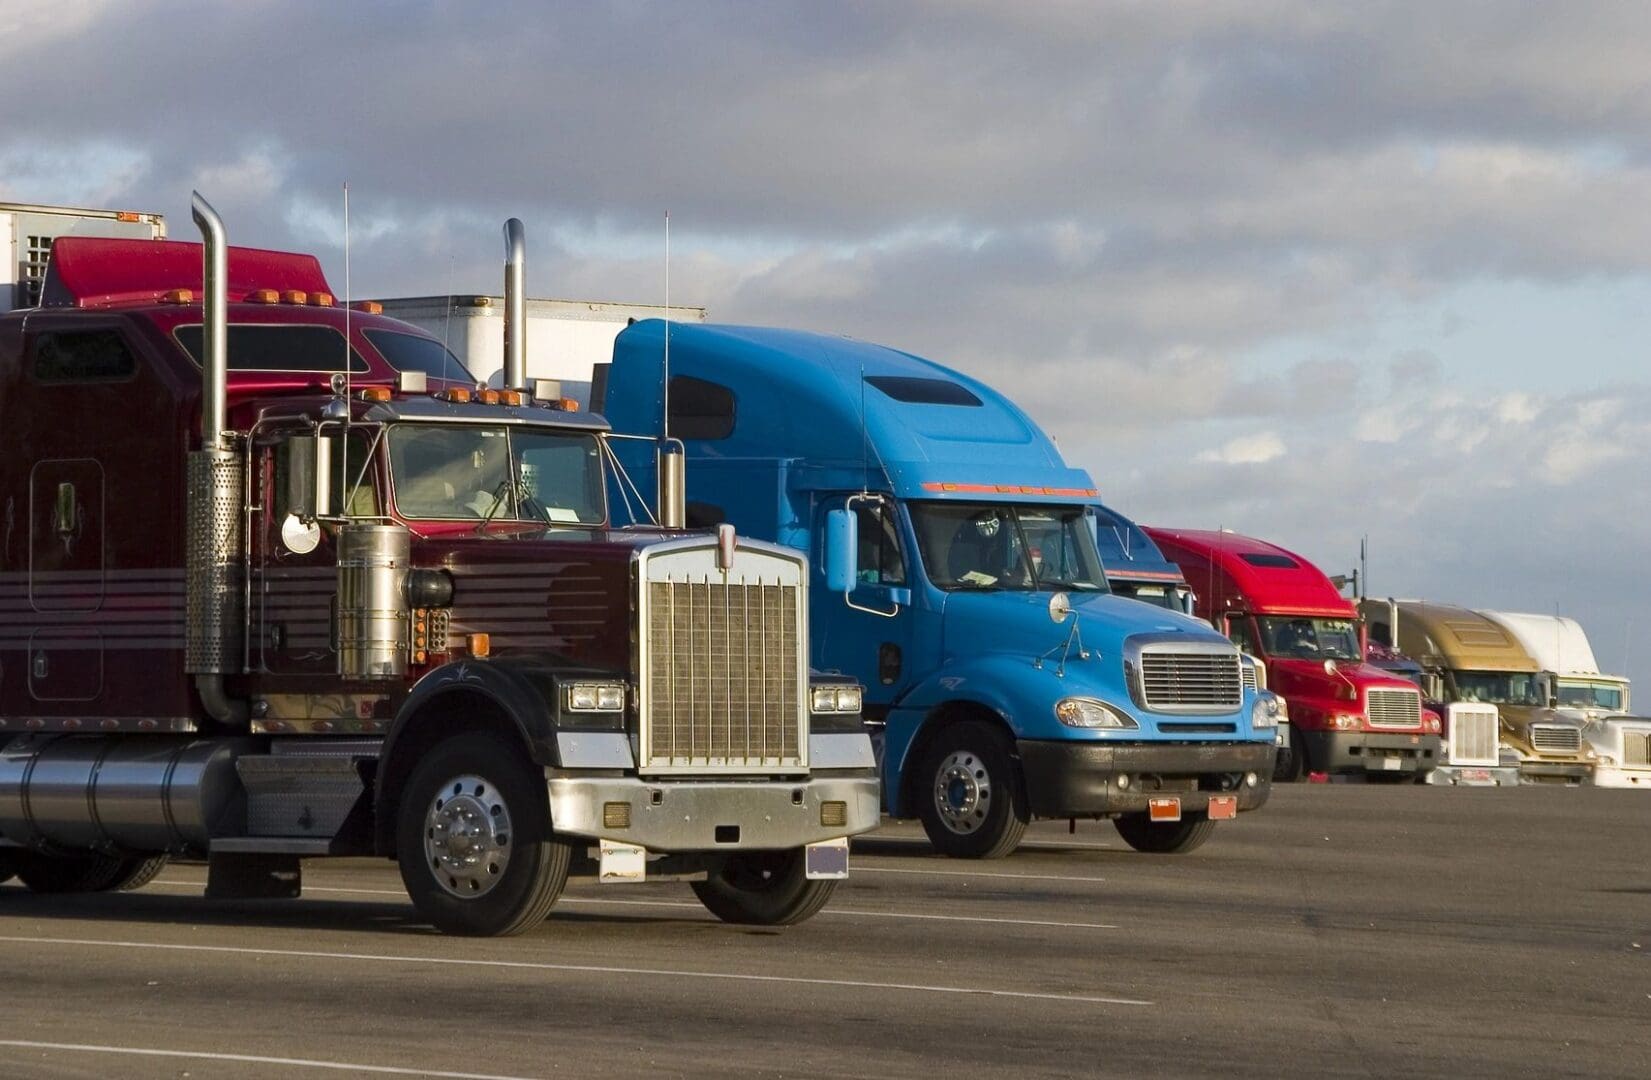 A group of trucks are parked on the side of the road.